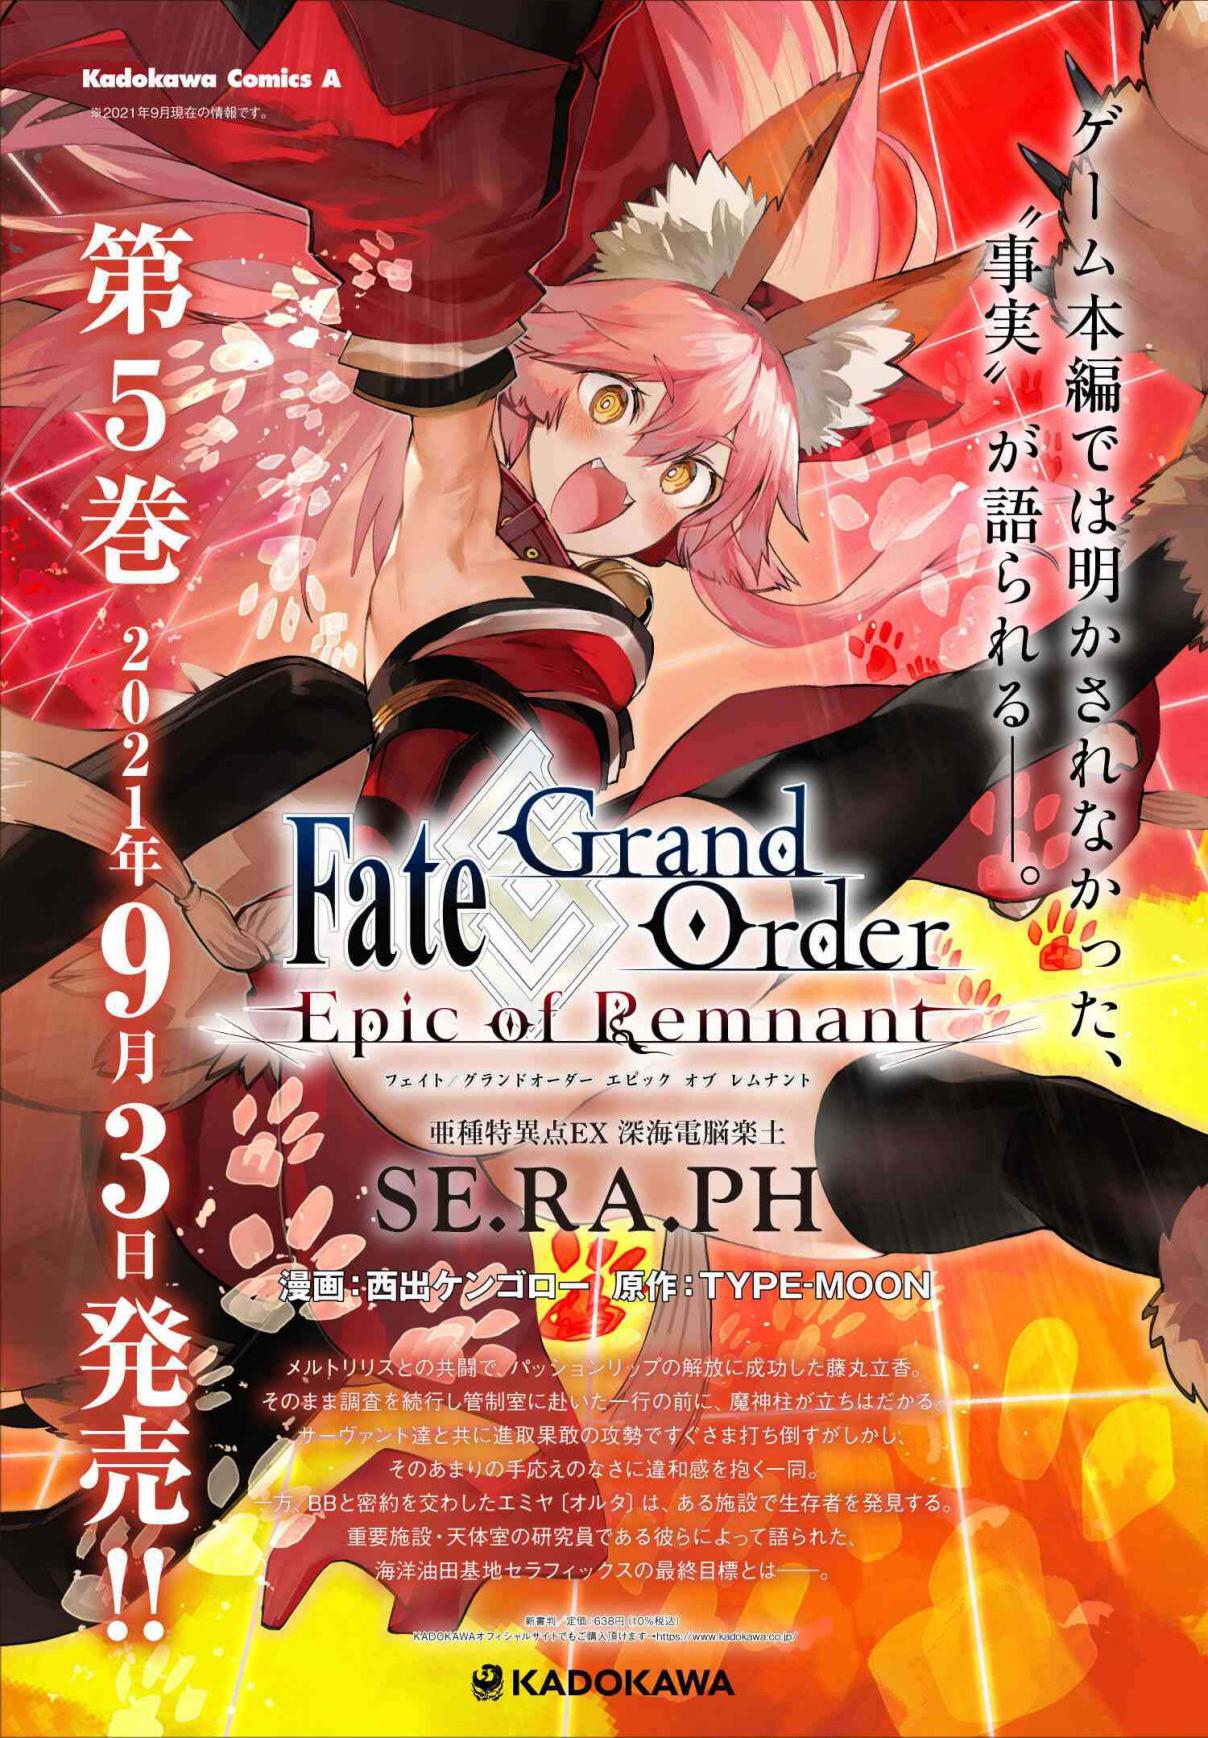 Fate/Grand Order -Epic of Remnant- Deep Sea Cyber-Paradise, SE.RA.PH 27.2